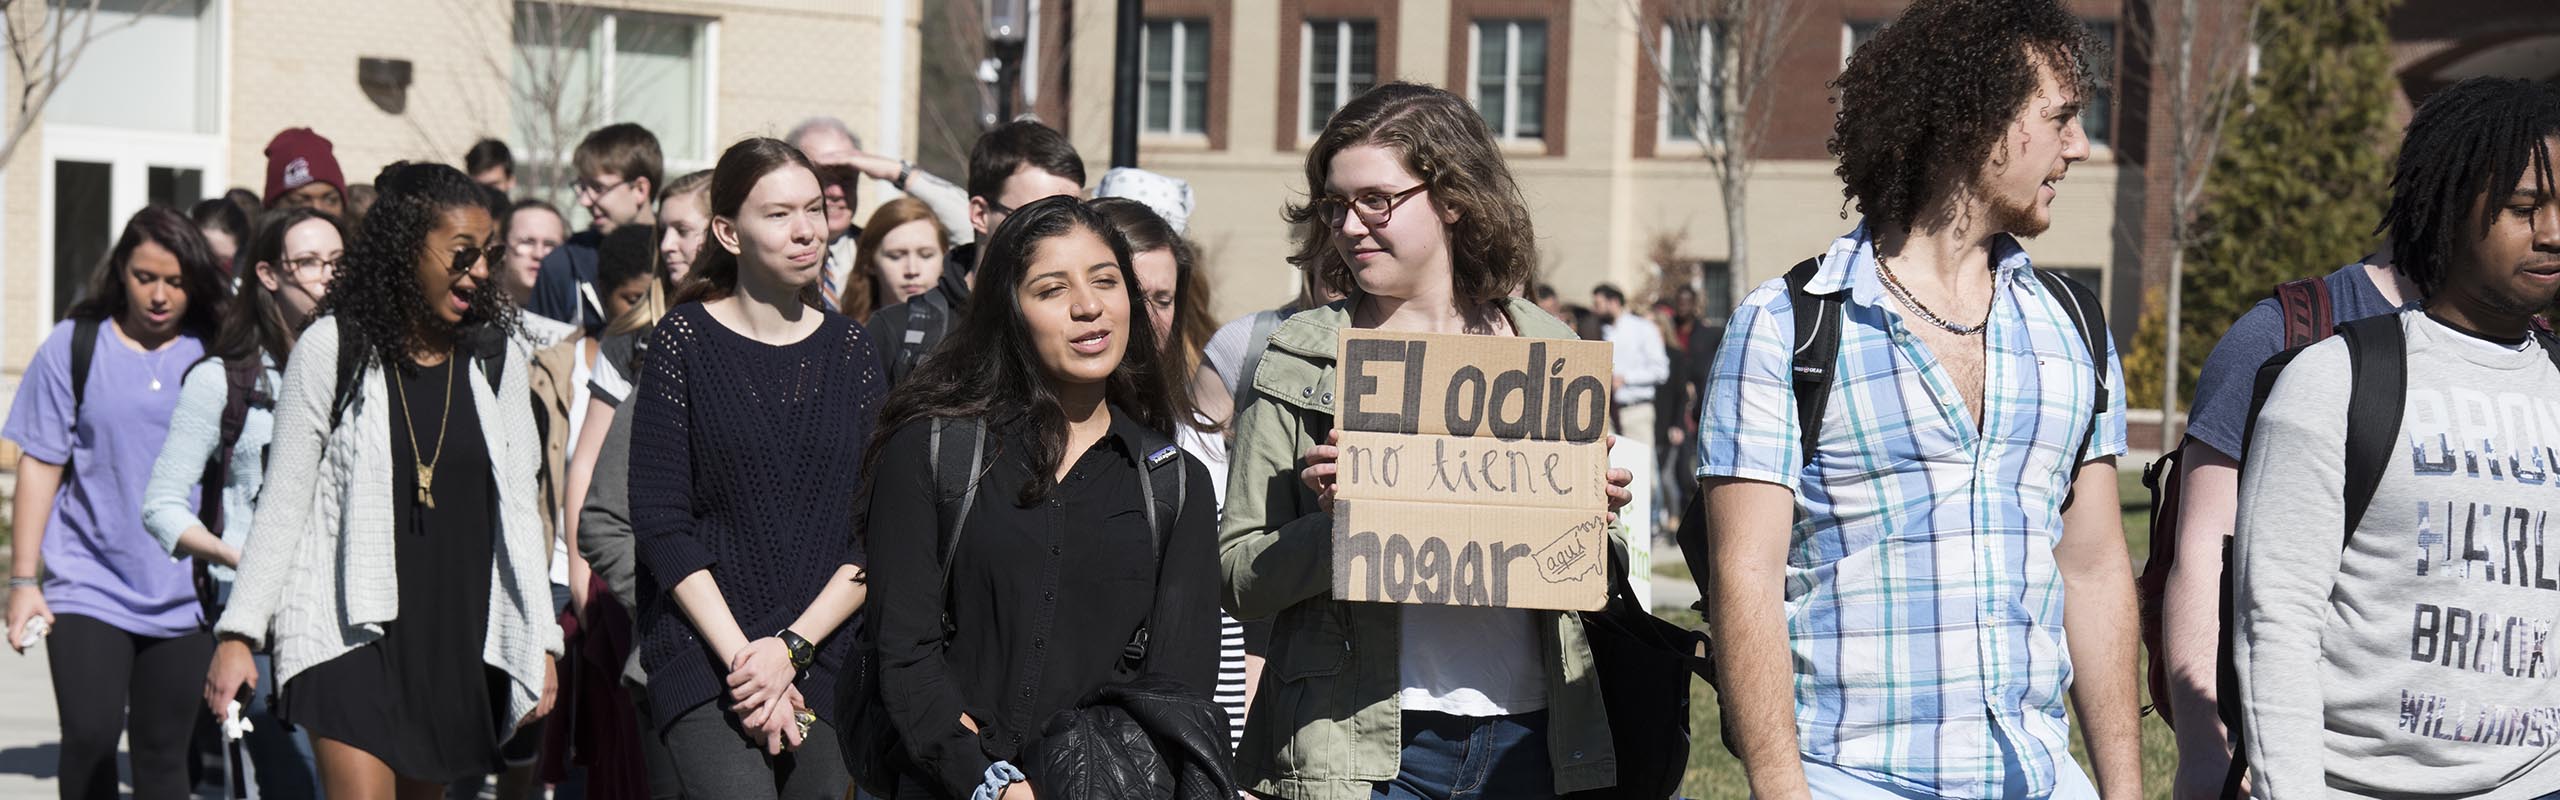 More than 100 students, faculty and staff gathered at Elon’s Speakers' Corner on Young Commons to share their concerns and hold a march about the president’s recent Executive Order regarding immigration.